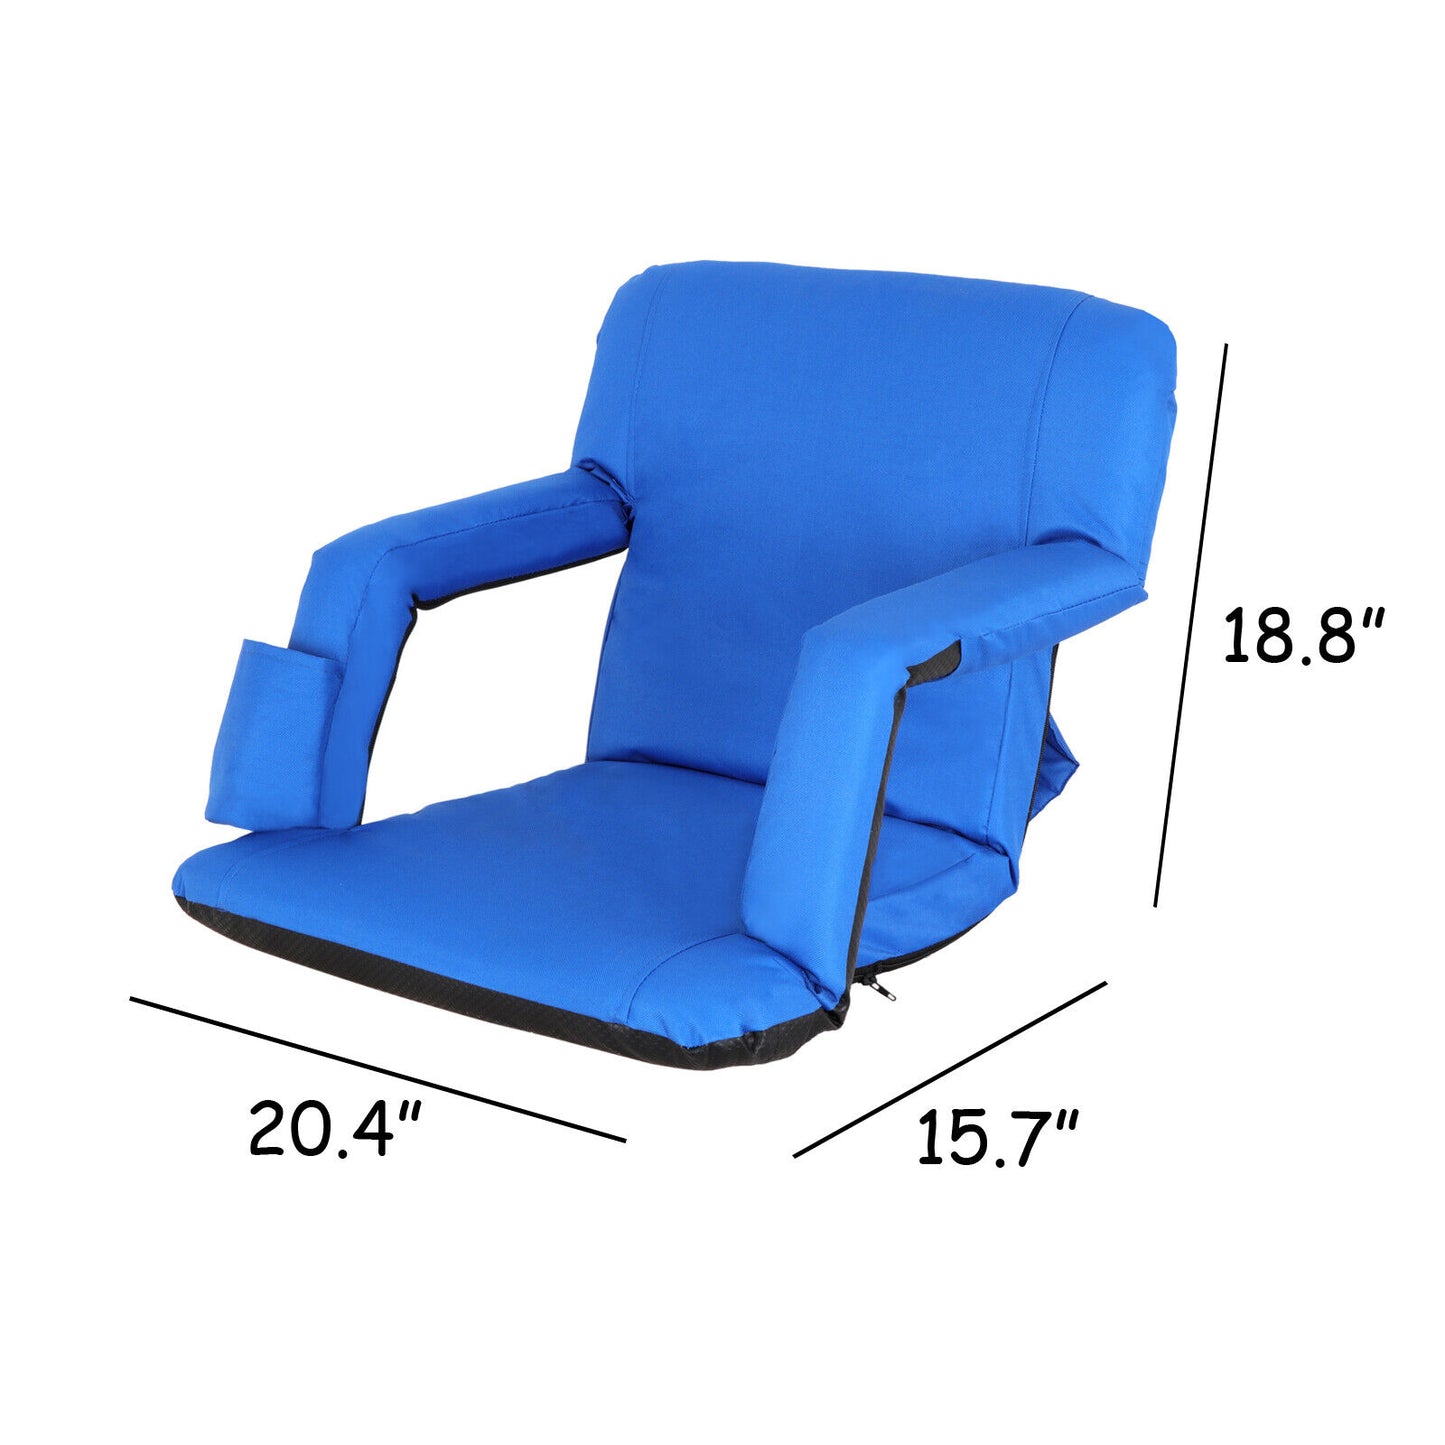 Easy Carry Stadium Seats Chairs Blue Bleachers Benches W/ Padded Cushion Backs